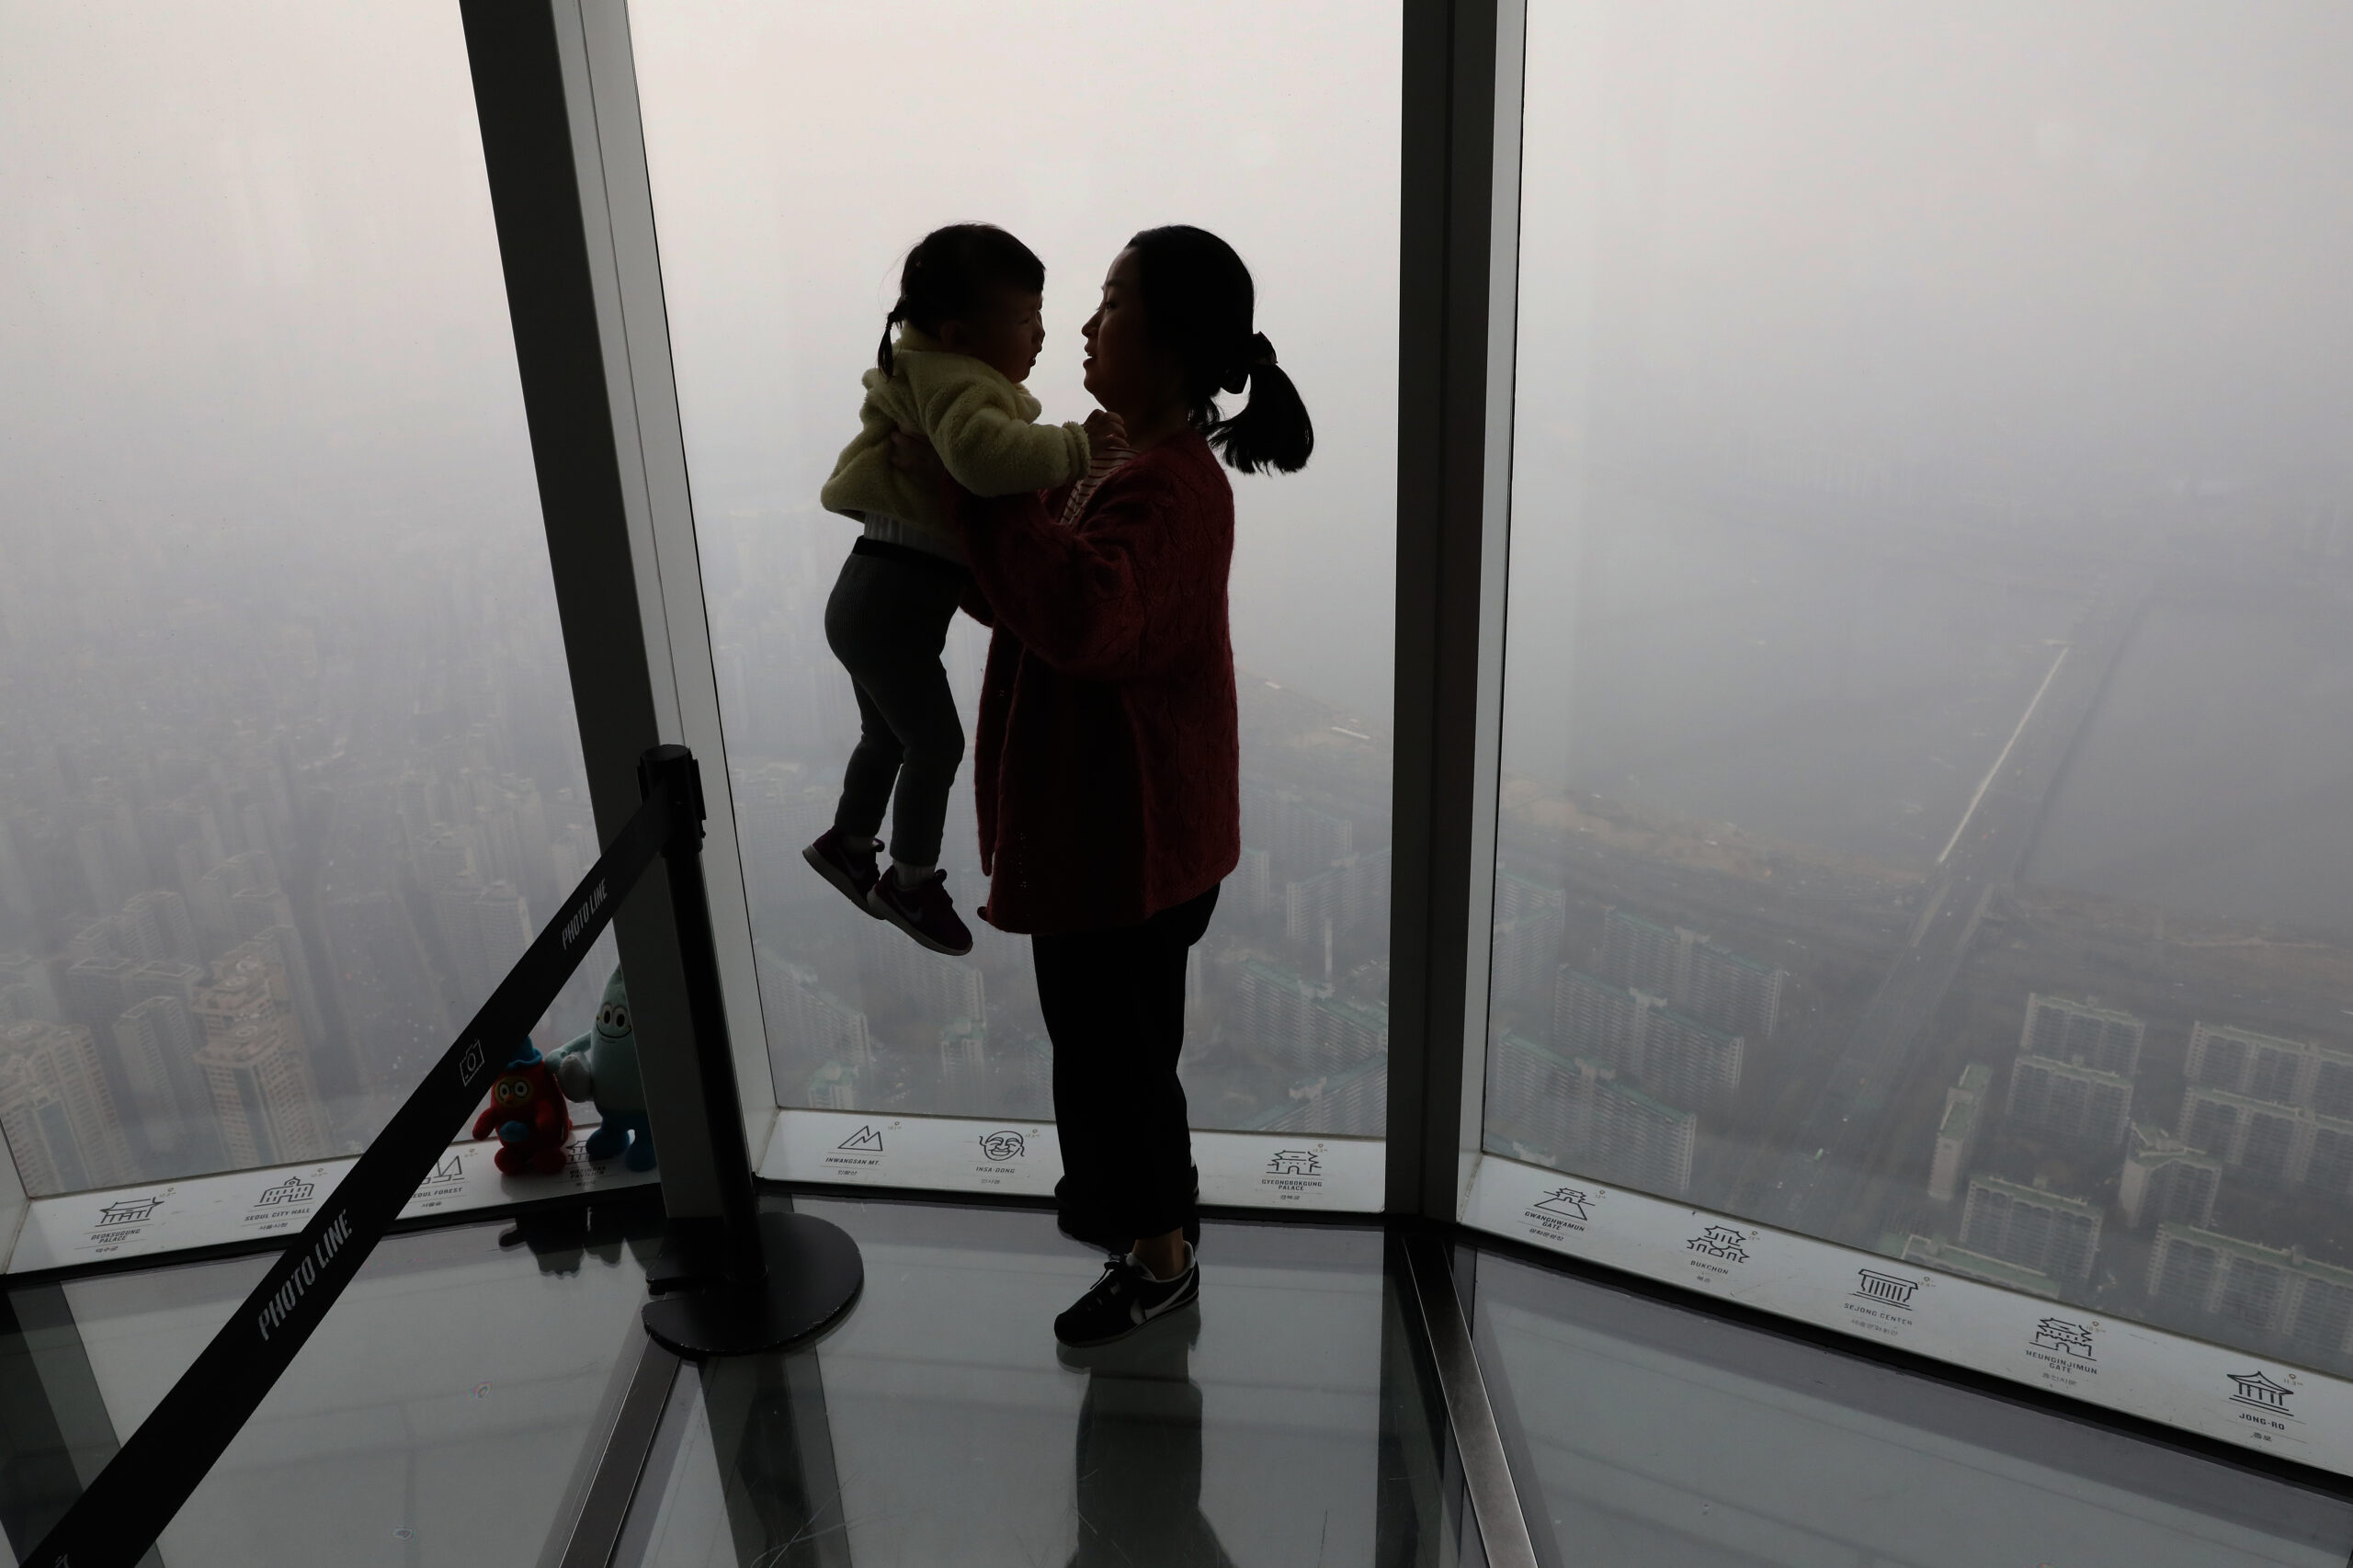 The silhouette of woman holds a small child in her arms. Both are standing in front of a window on a smoggy day.